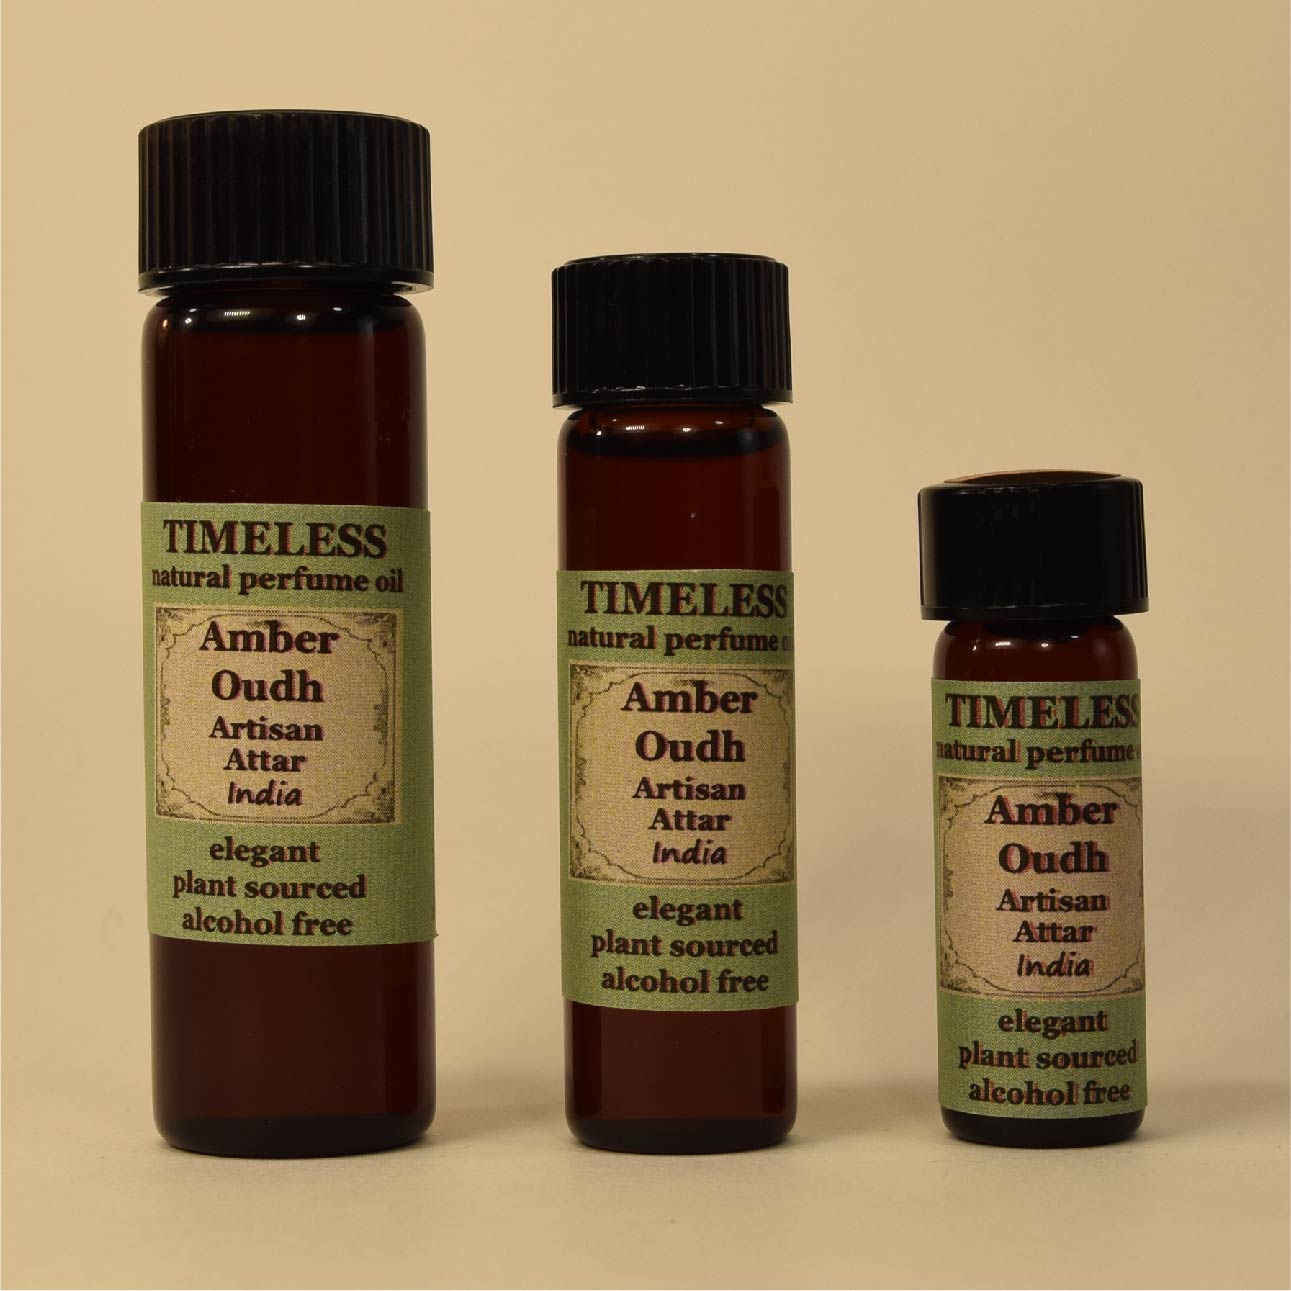 TIMELESS Amber Oudh Attar has a warm, sweet, musky, woody aroma, which evokes softness and beauty.  